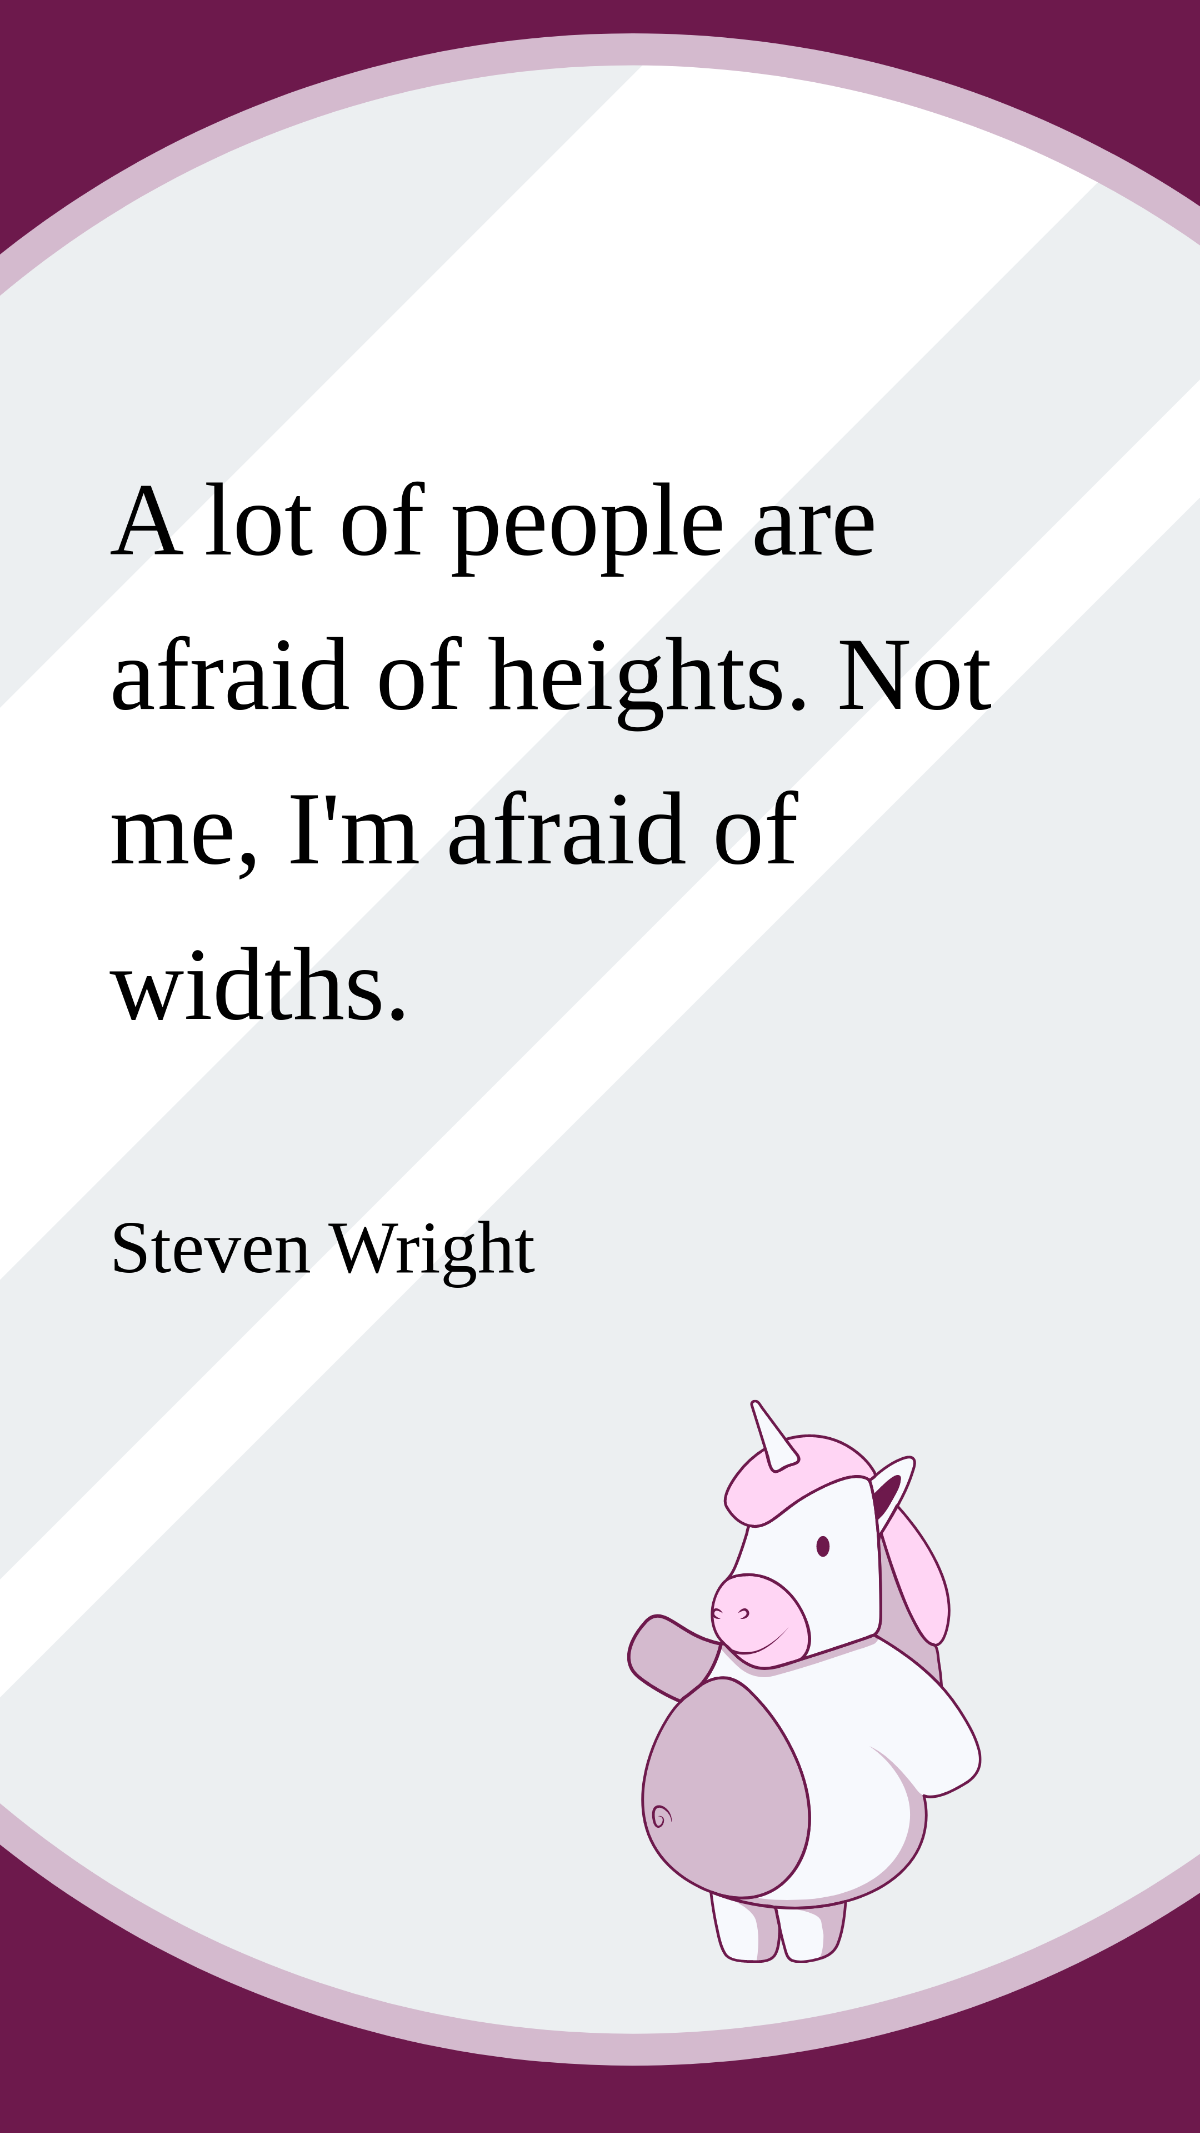 Free Steven Wright - A lot of people are afraid of heights. Not me, I'm afraid of widths. Template